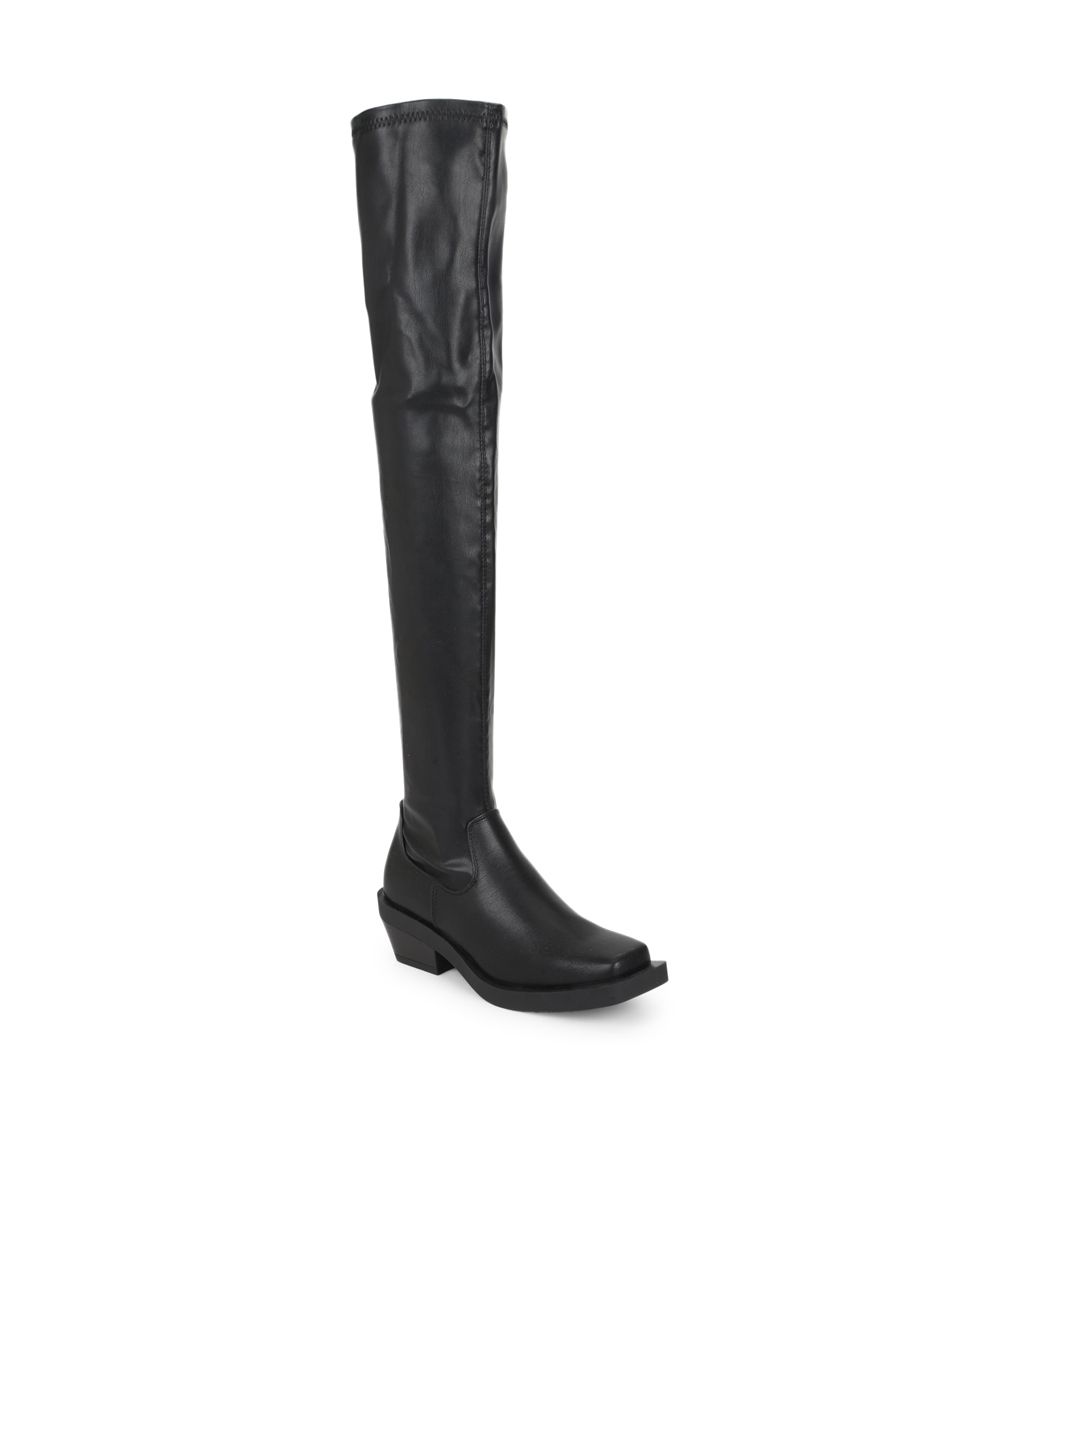 Truffle Collection Black PU Block Heeled Knee-High Boots Price in India